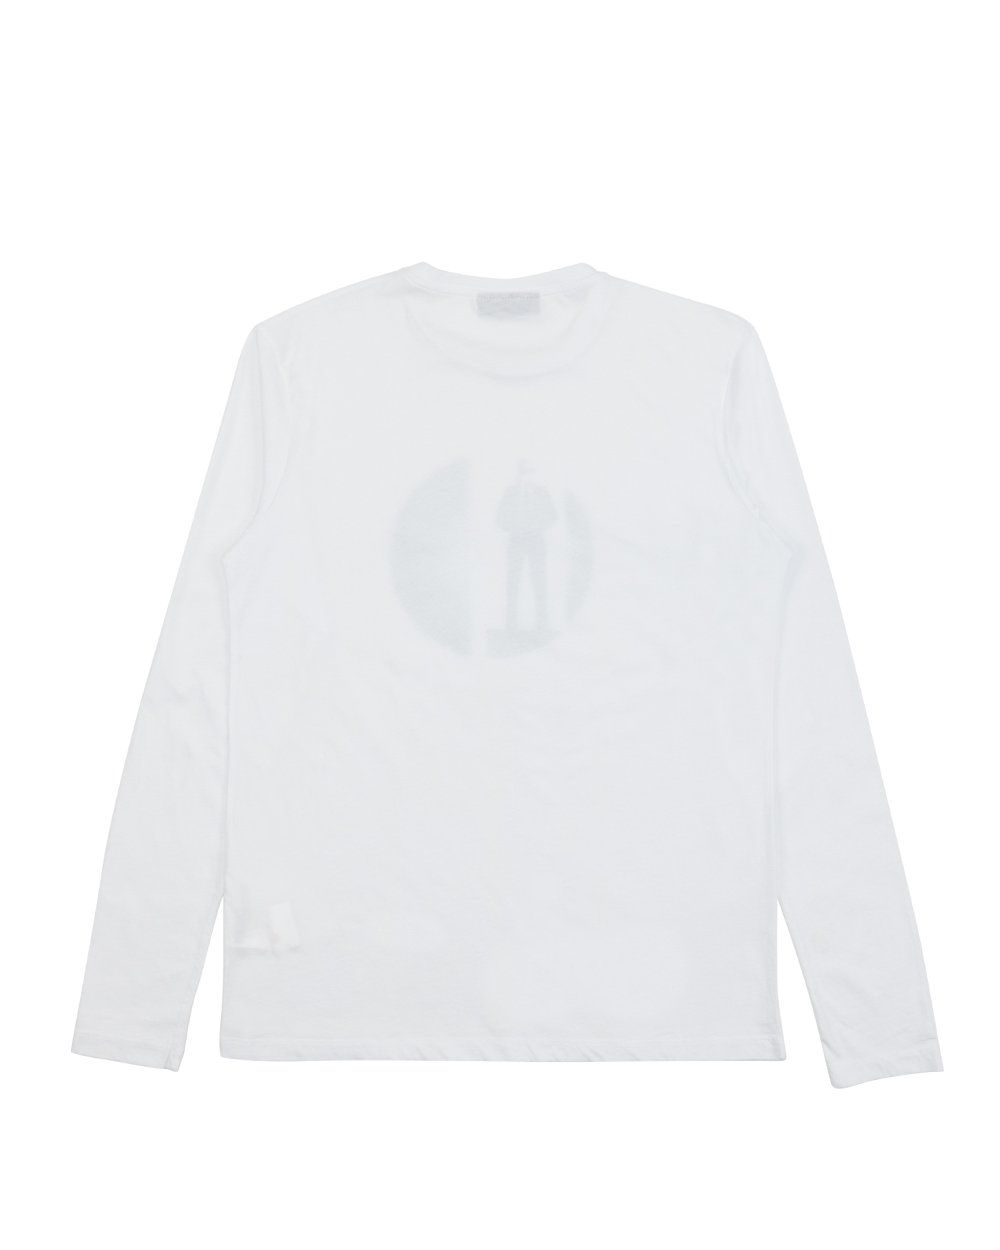 Cotton Printed Round Neck Long-Sleeves T-shirt - ISSI Outlet